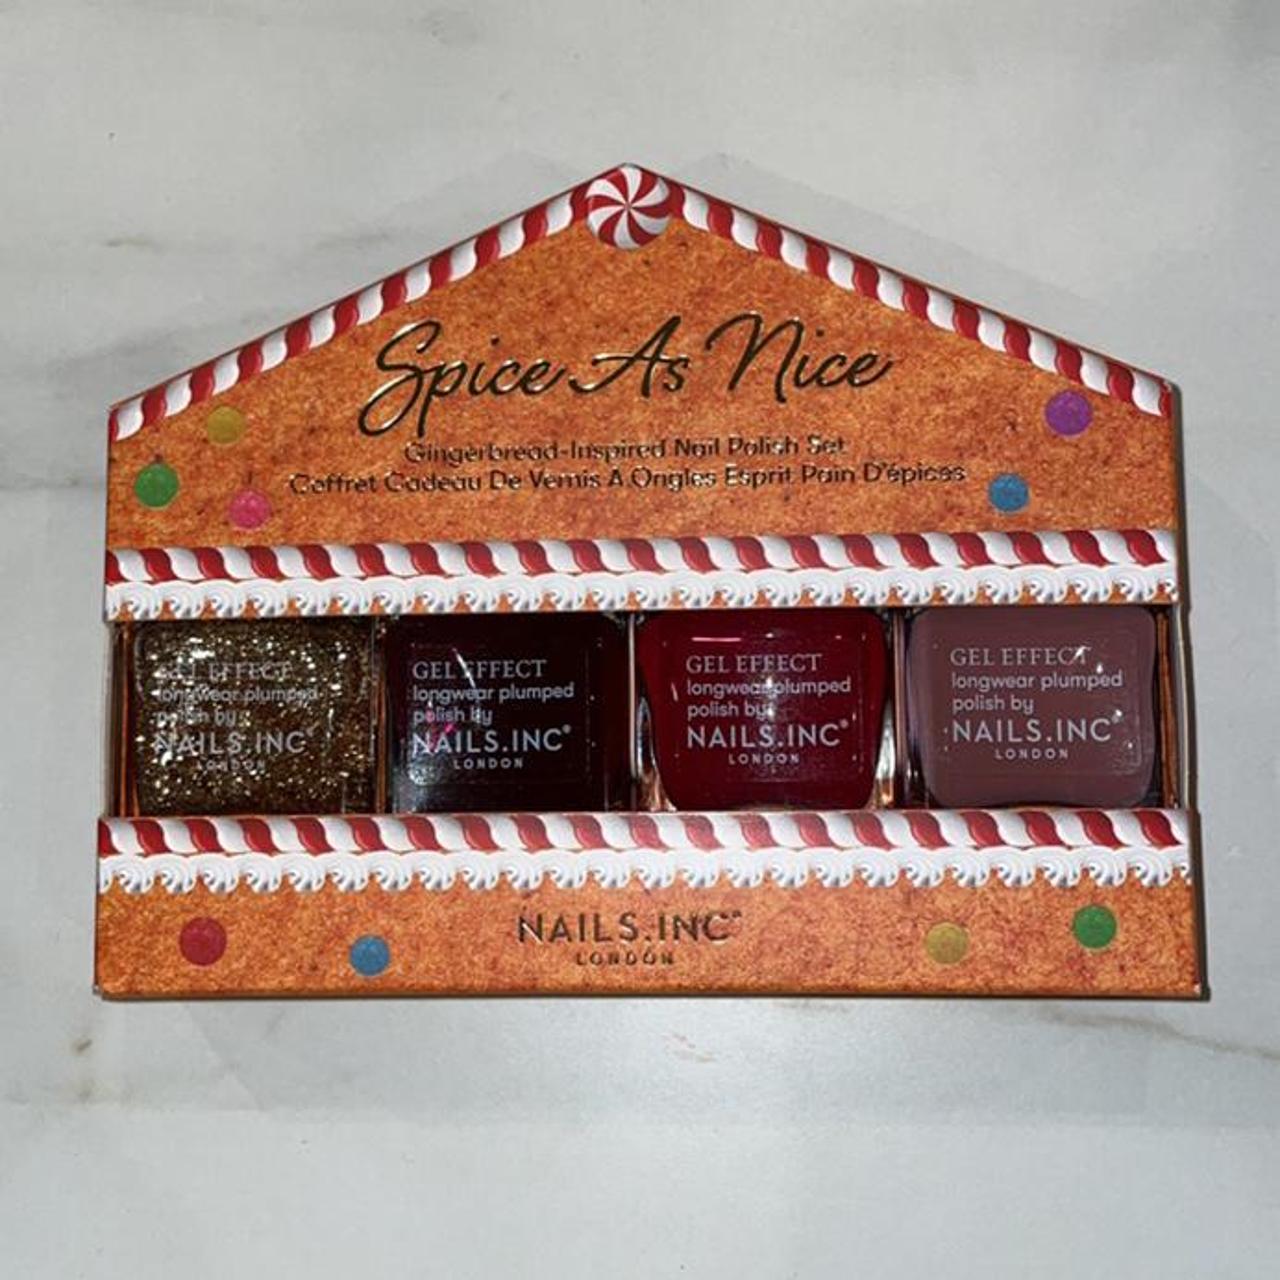 Product Image 1 - Nails Inc Spice As Nice